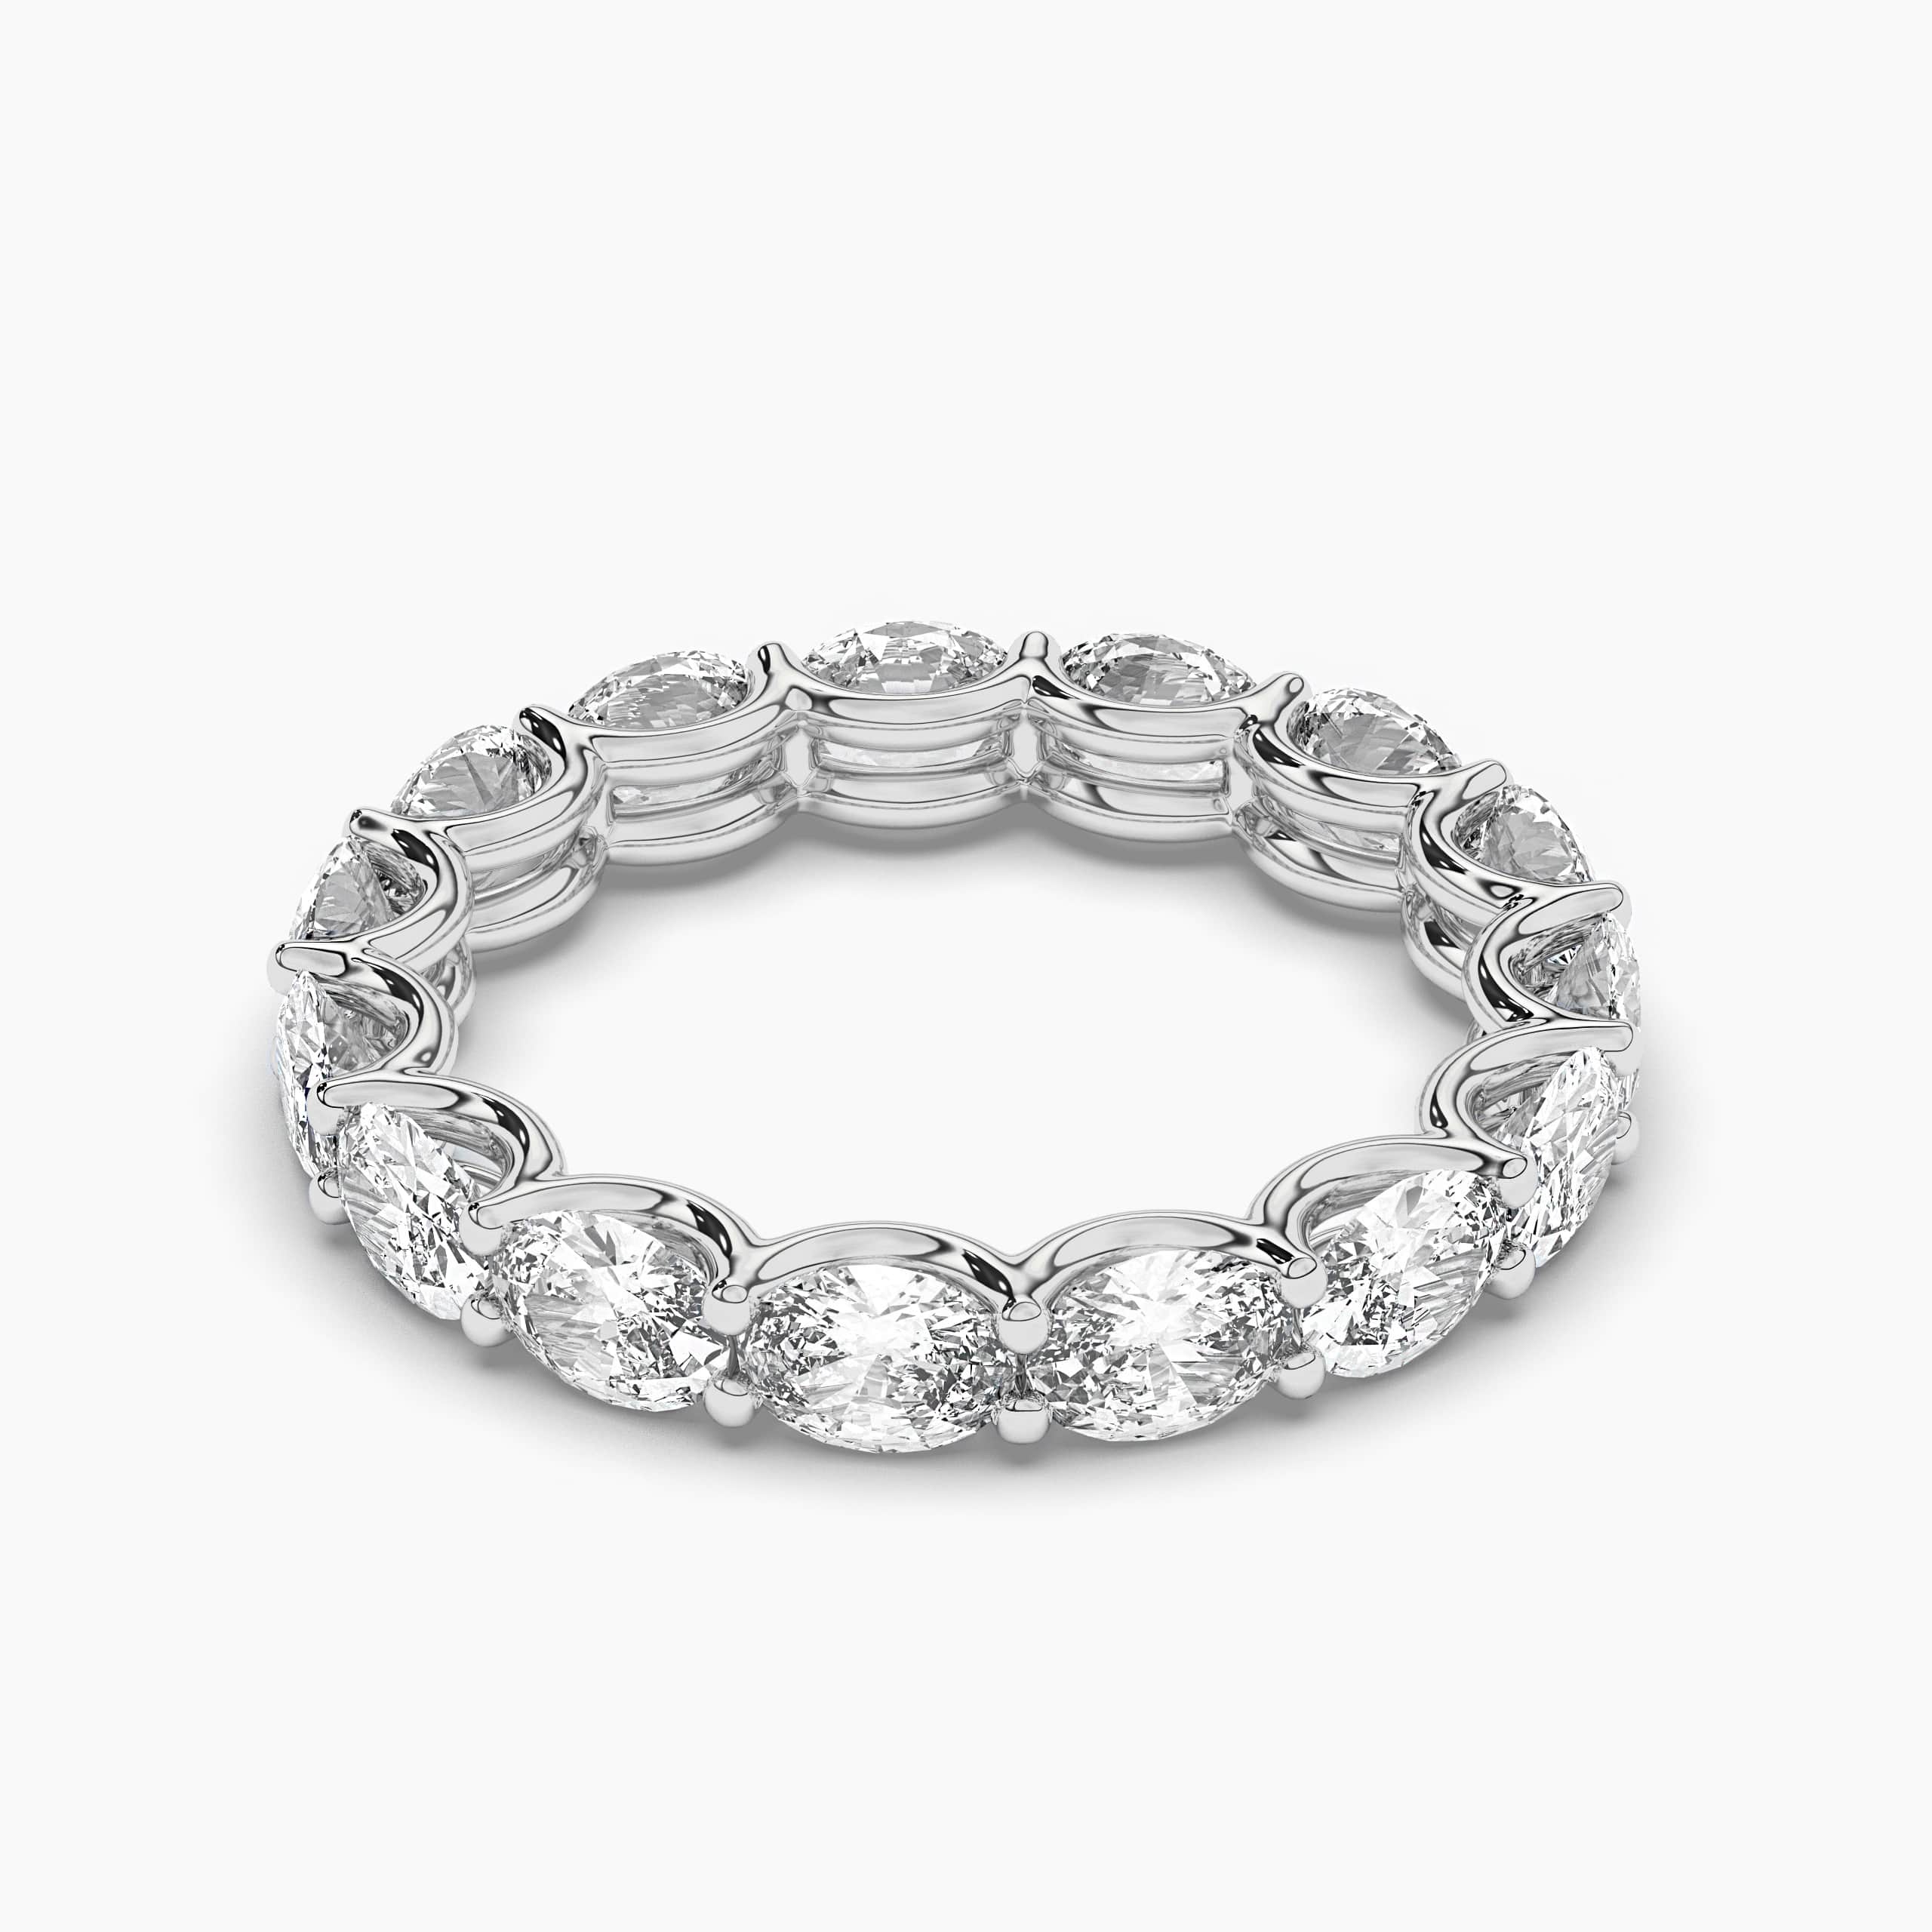 WHITE GOLD BAND WITH OVAL DIAMONDS